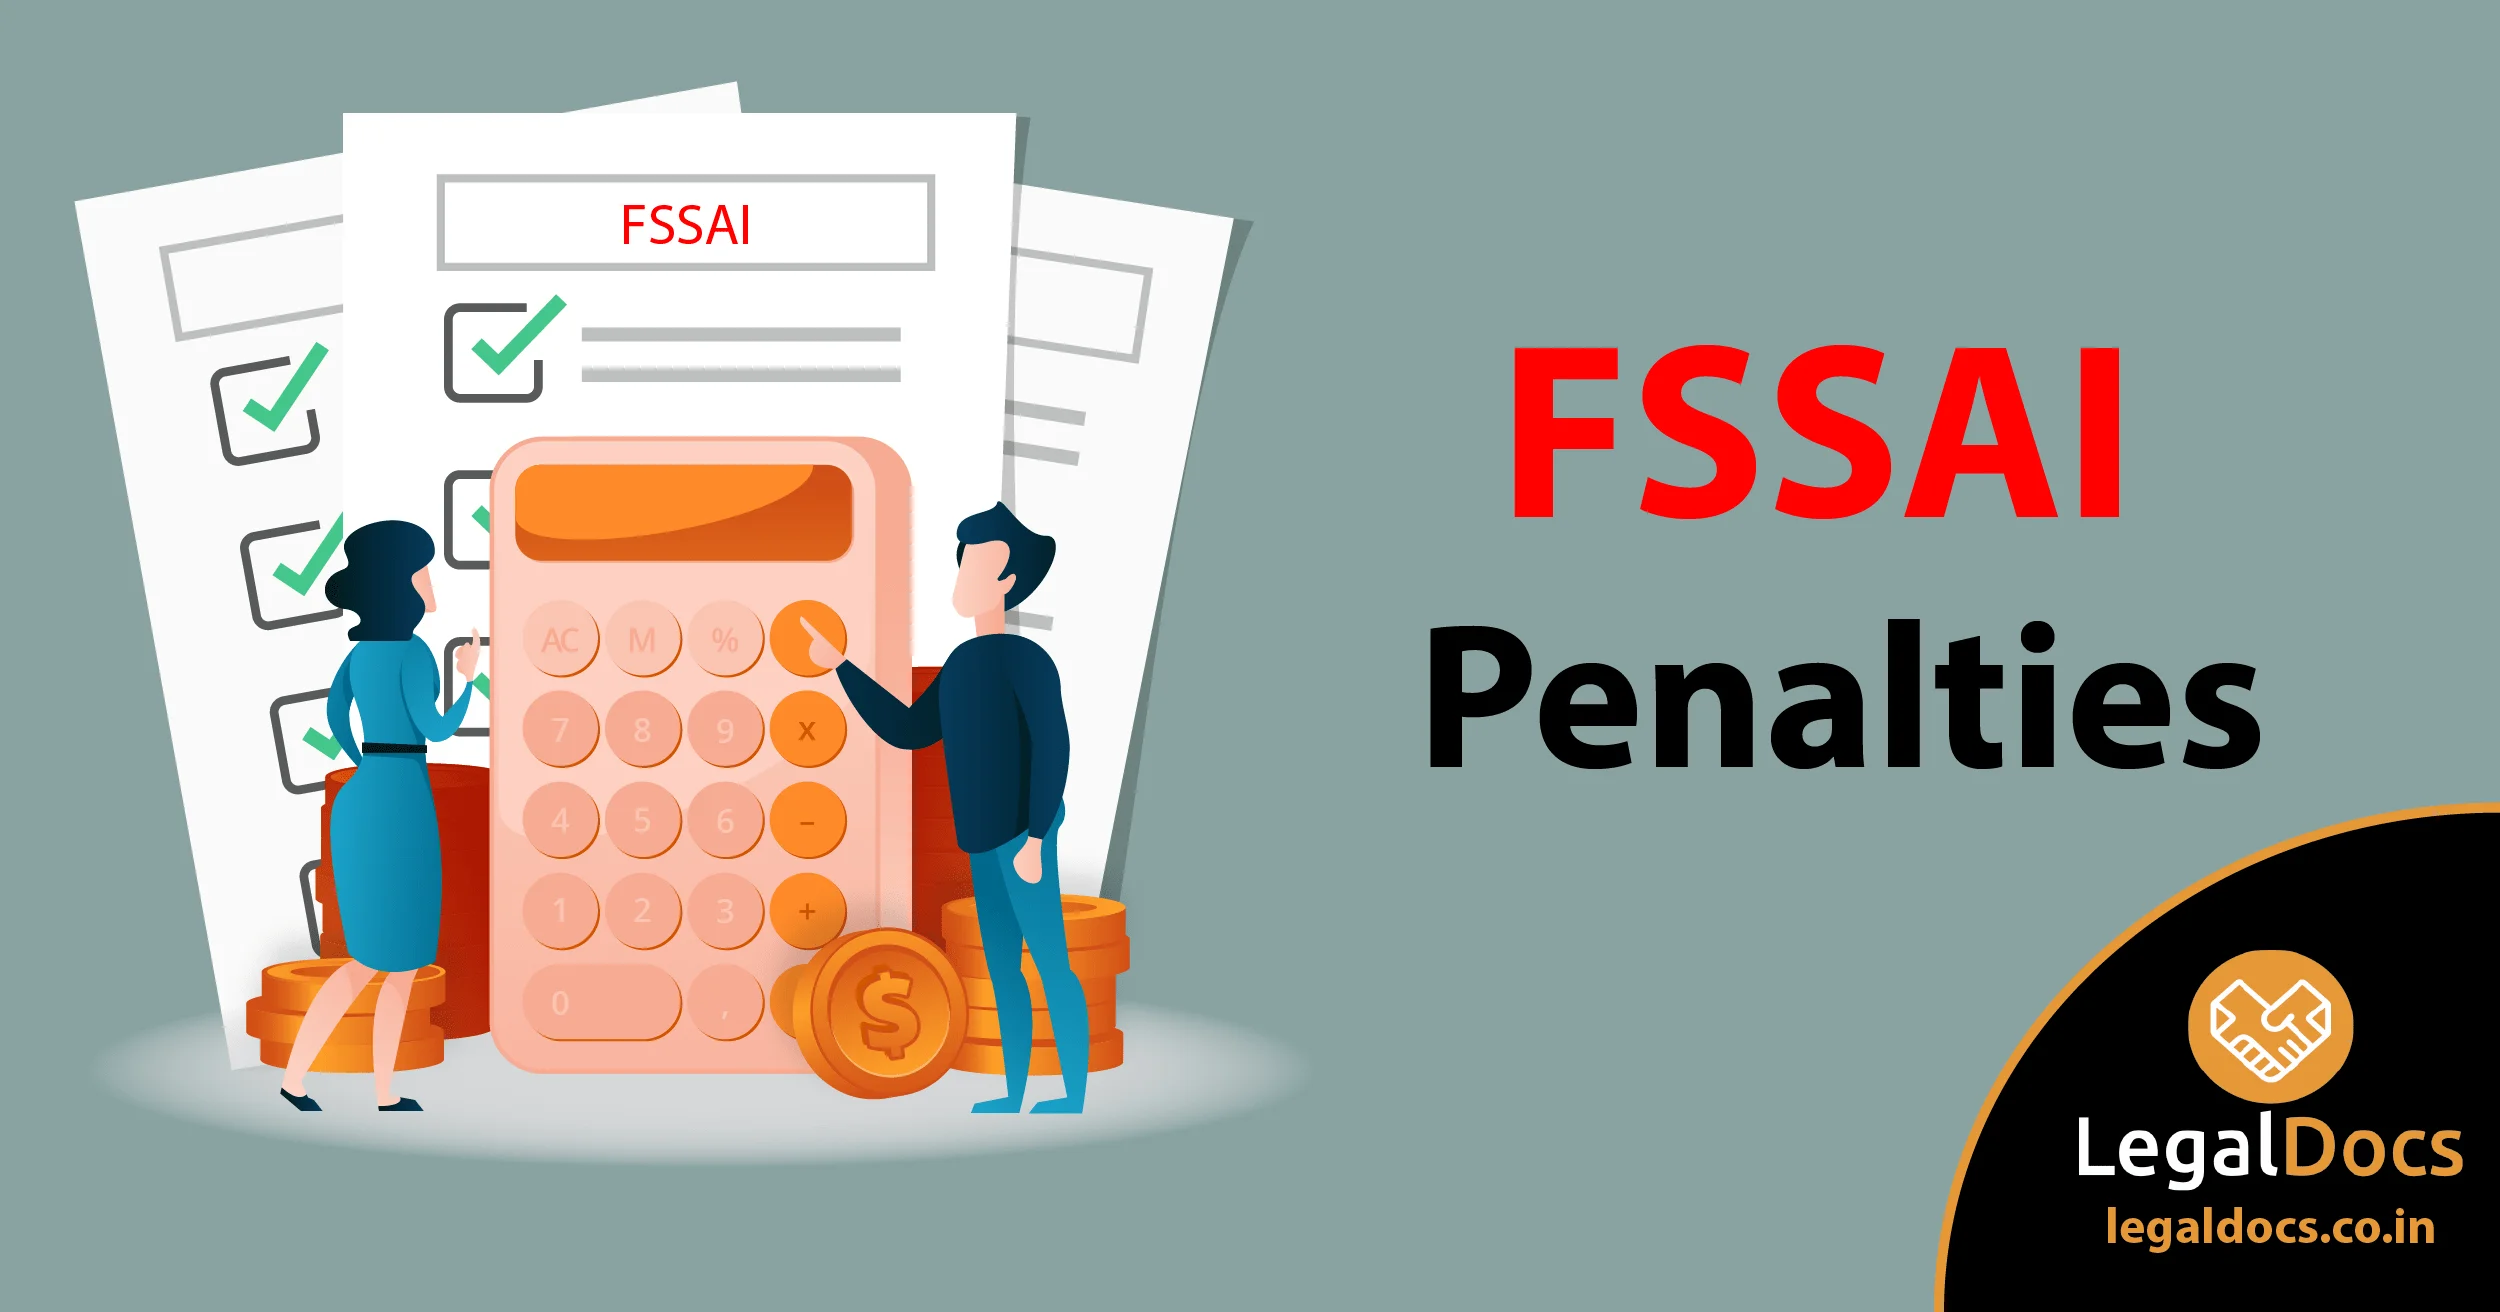 All you need to know about FSSAI Penalty - LegalDocs